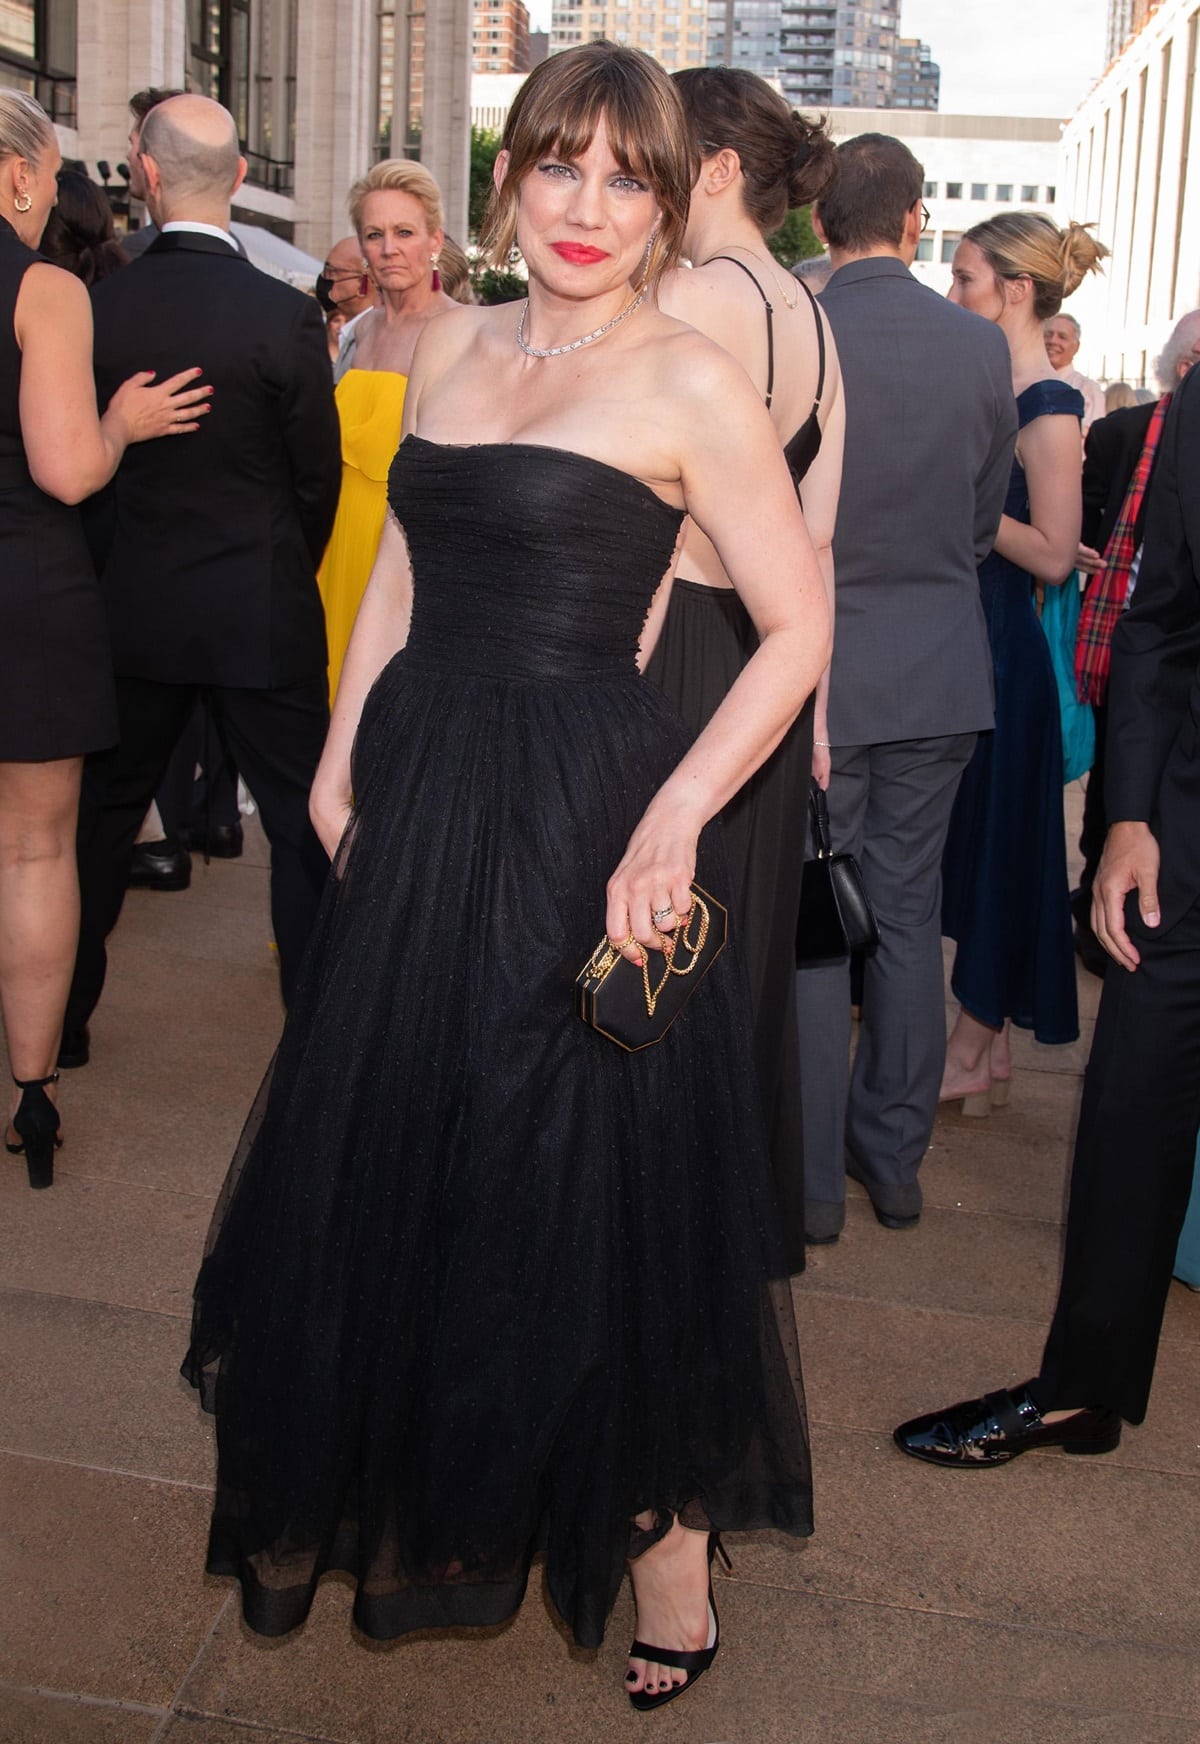 stunning onlookers in a strapless black dress that accentuated her figure